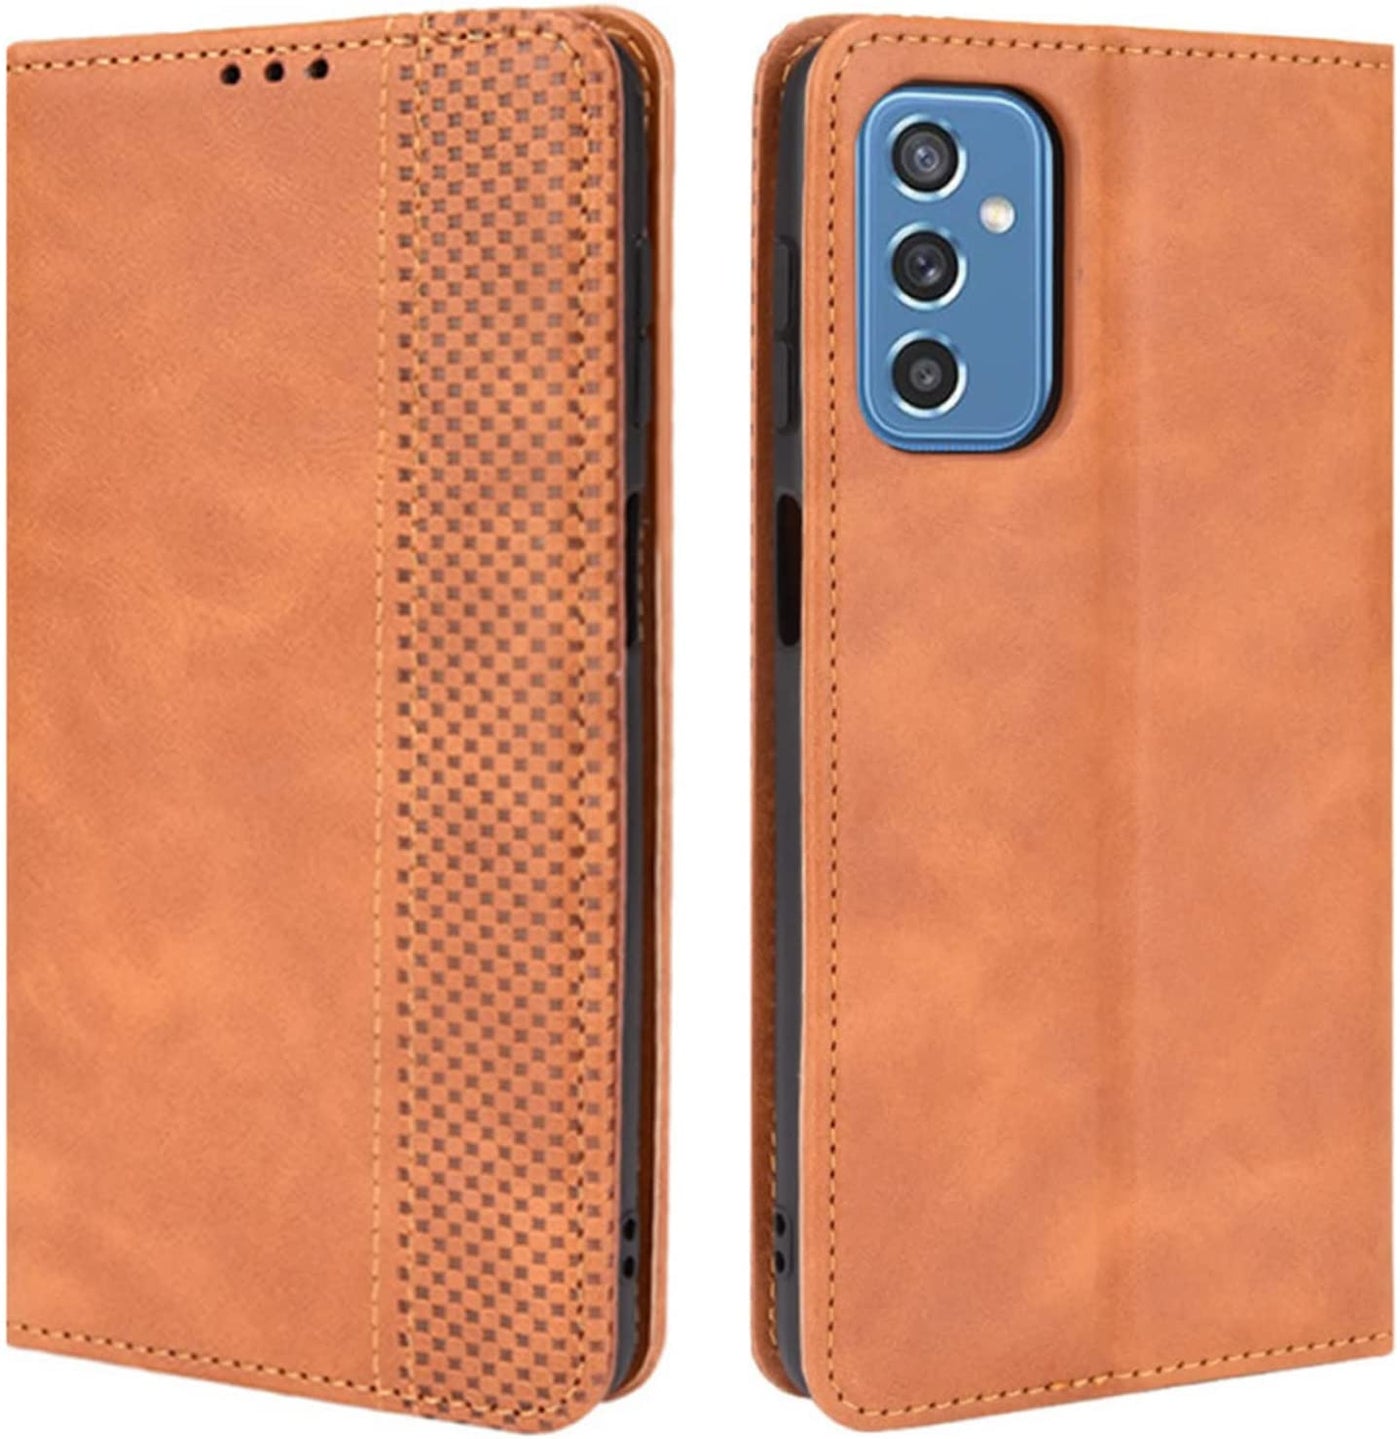 Samsung Galaxy M52 brown color leather wallet flip cover case By excelsior